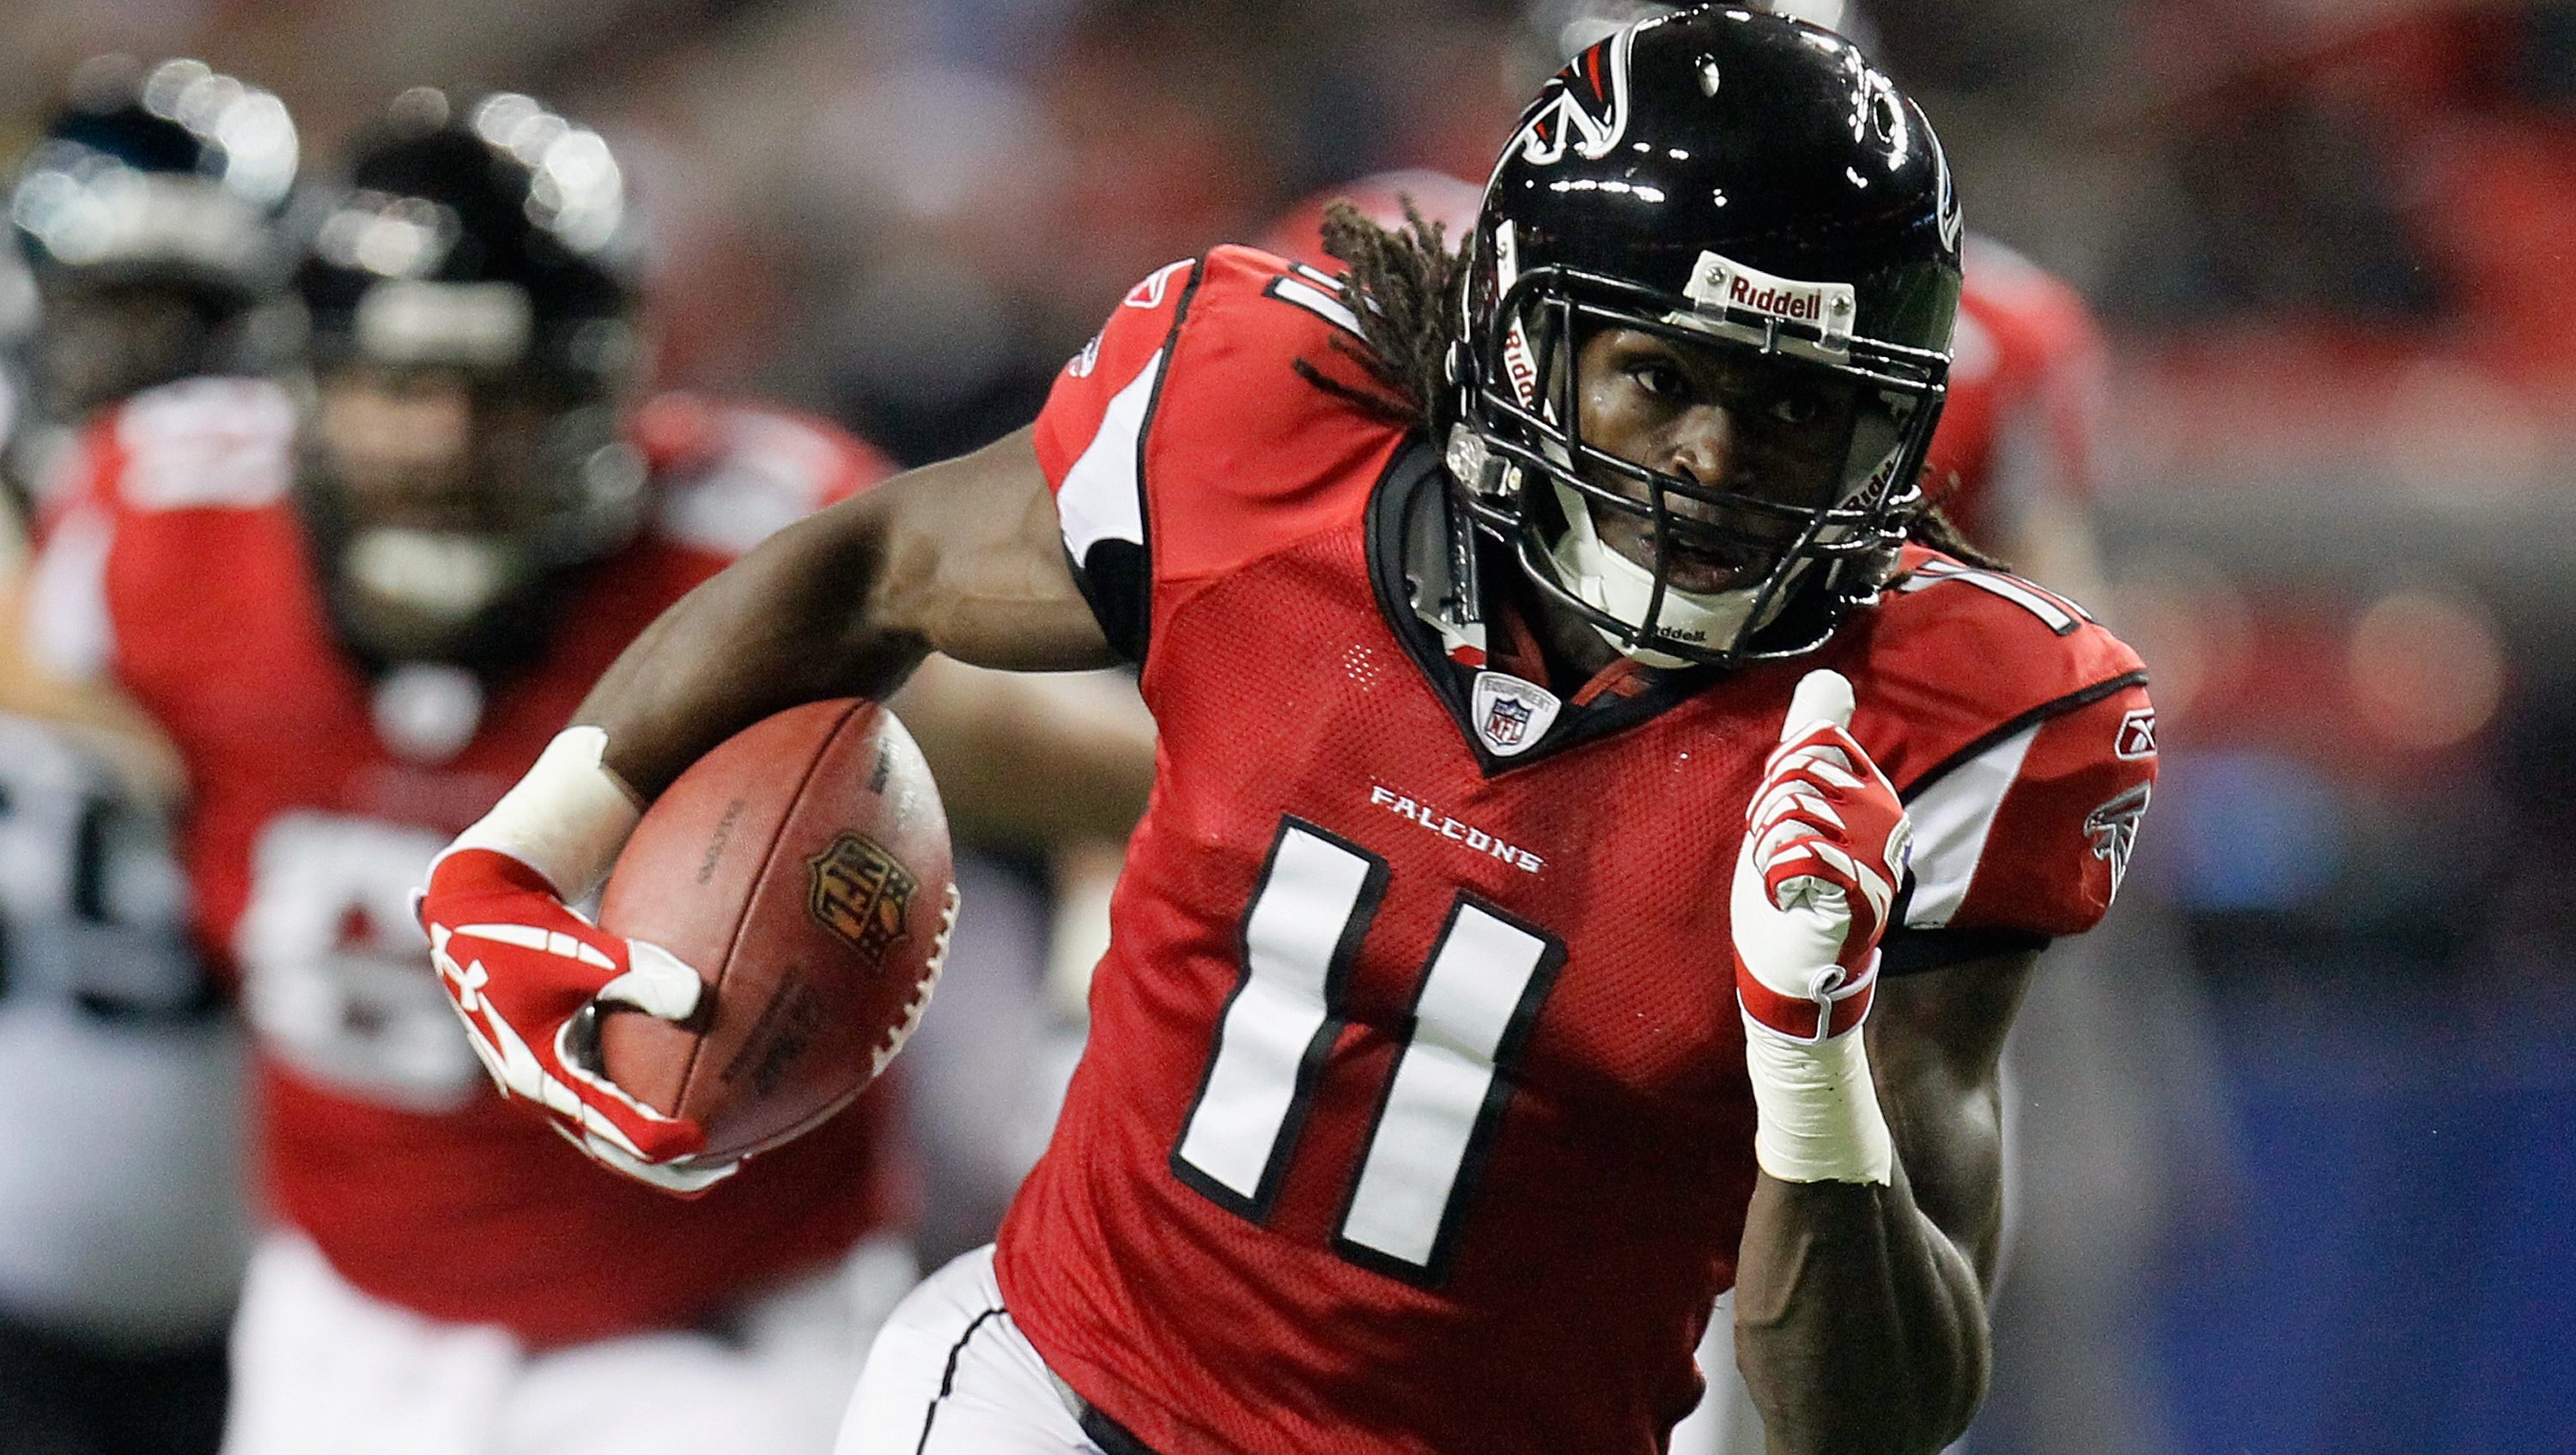 Why the Julio Jones trade to Titans happened - Sports Illustrated